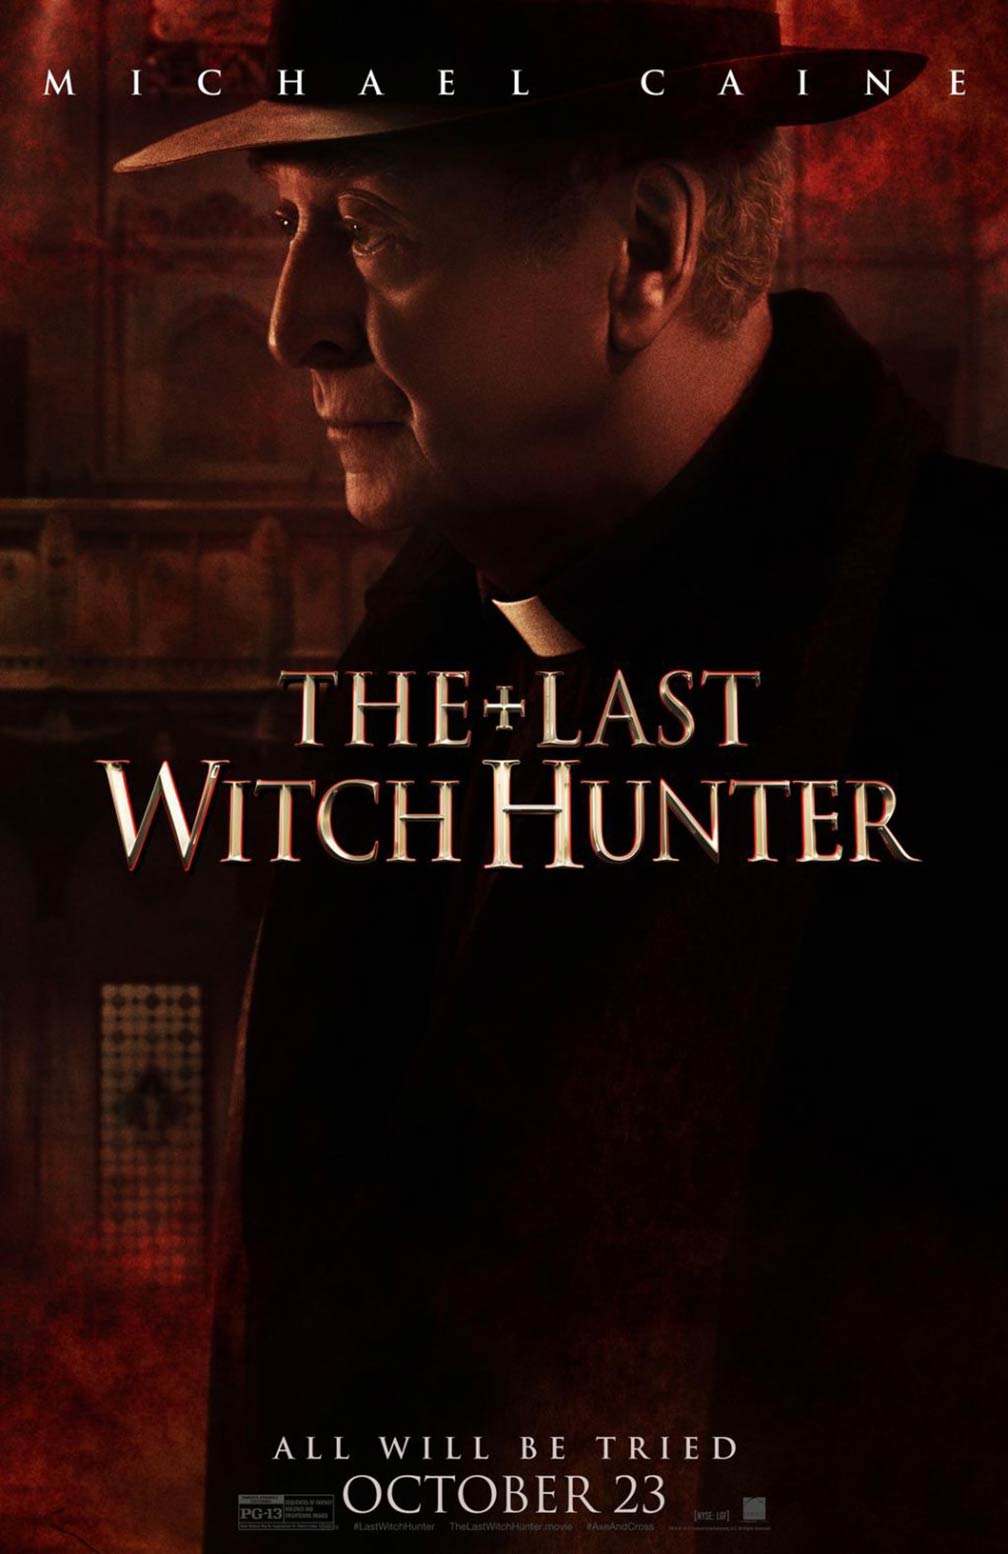 the last witch hunter 2 watch online